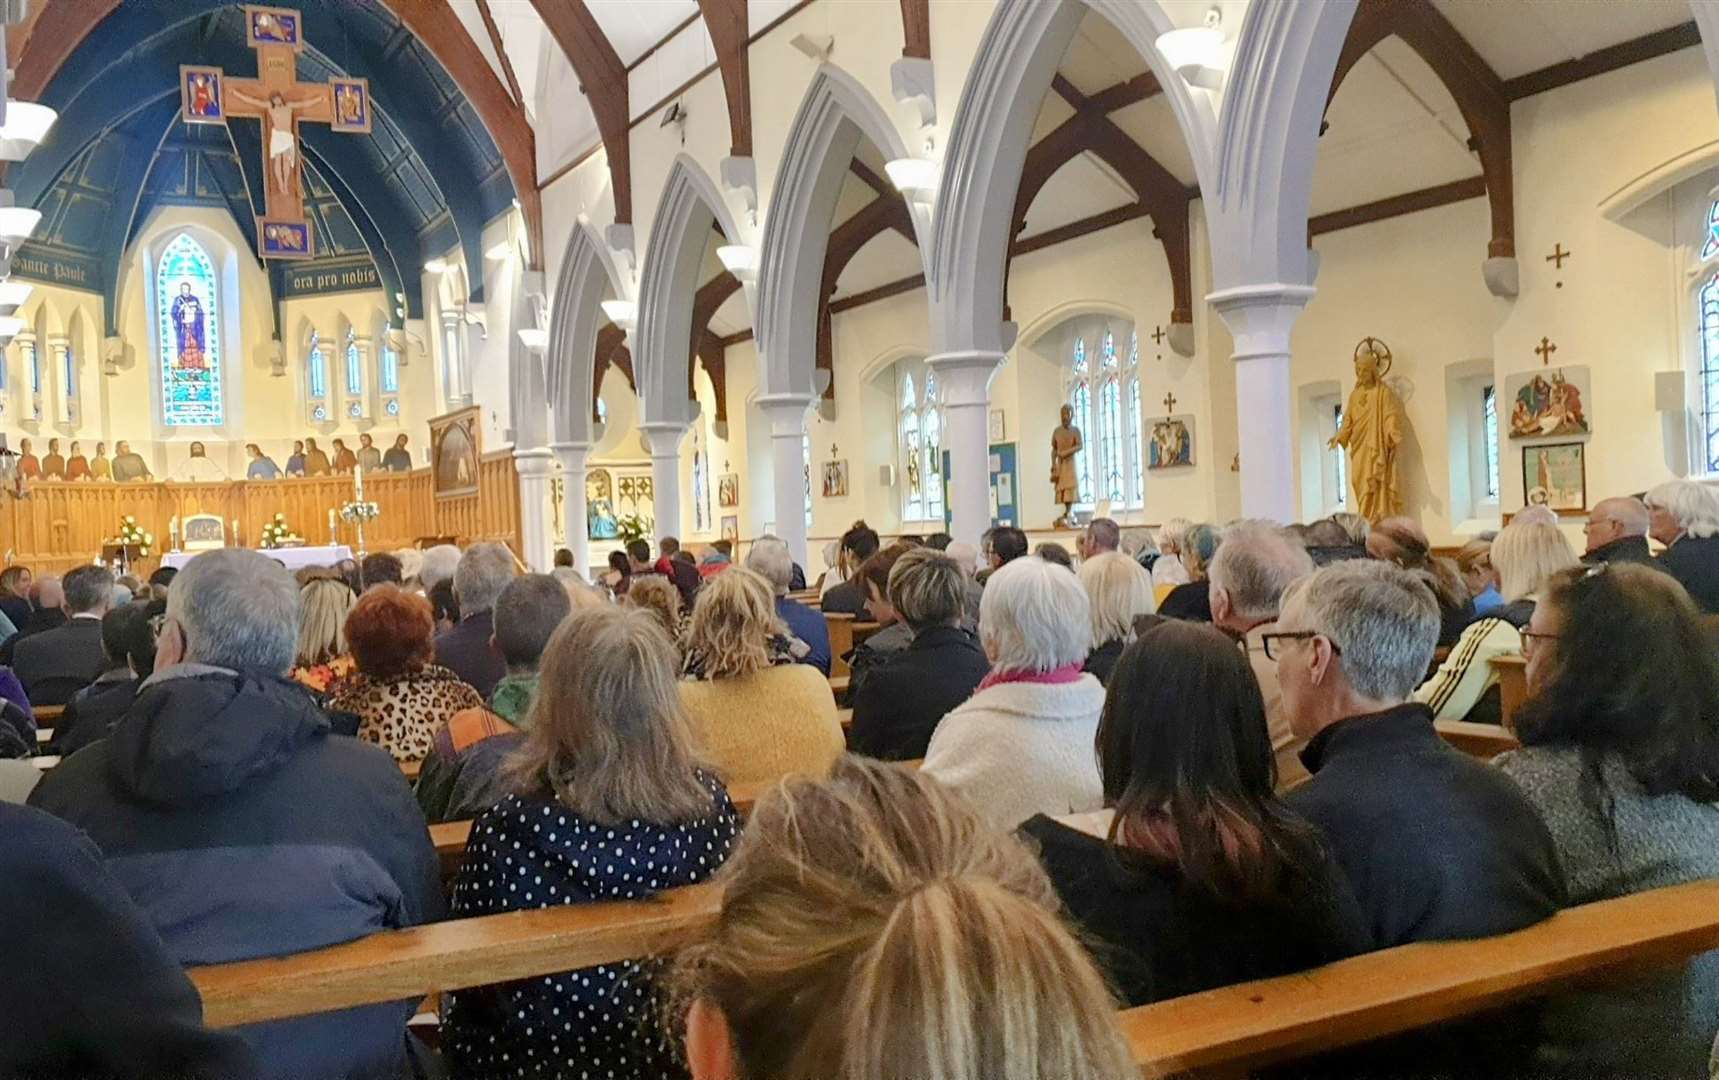 St Paul's Church in Dover was packed full of mourners for Paula Greenwood's funeral